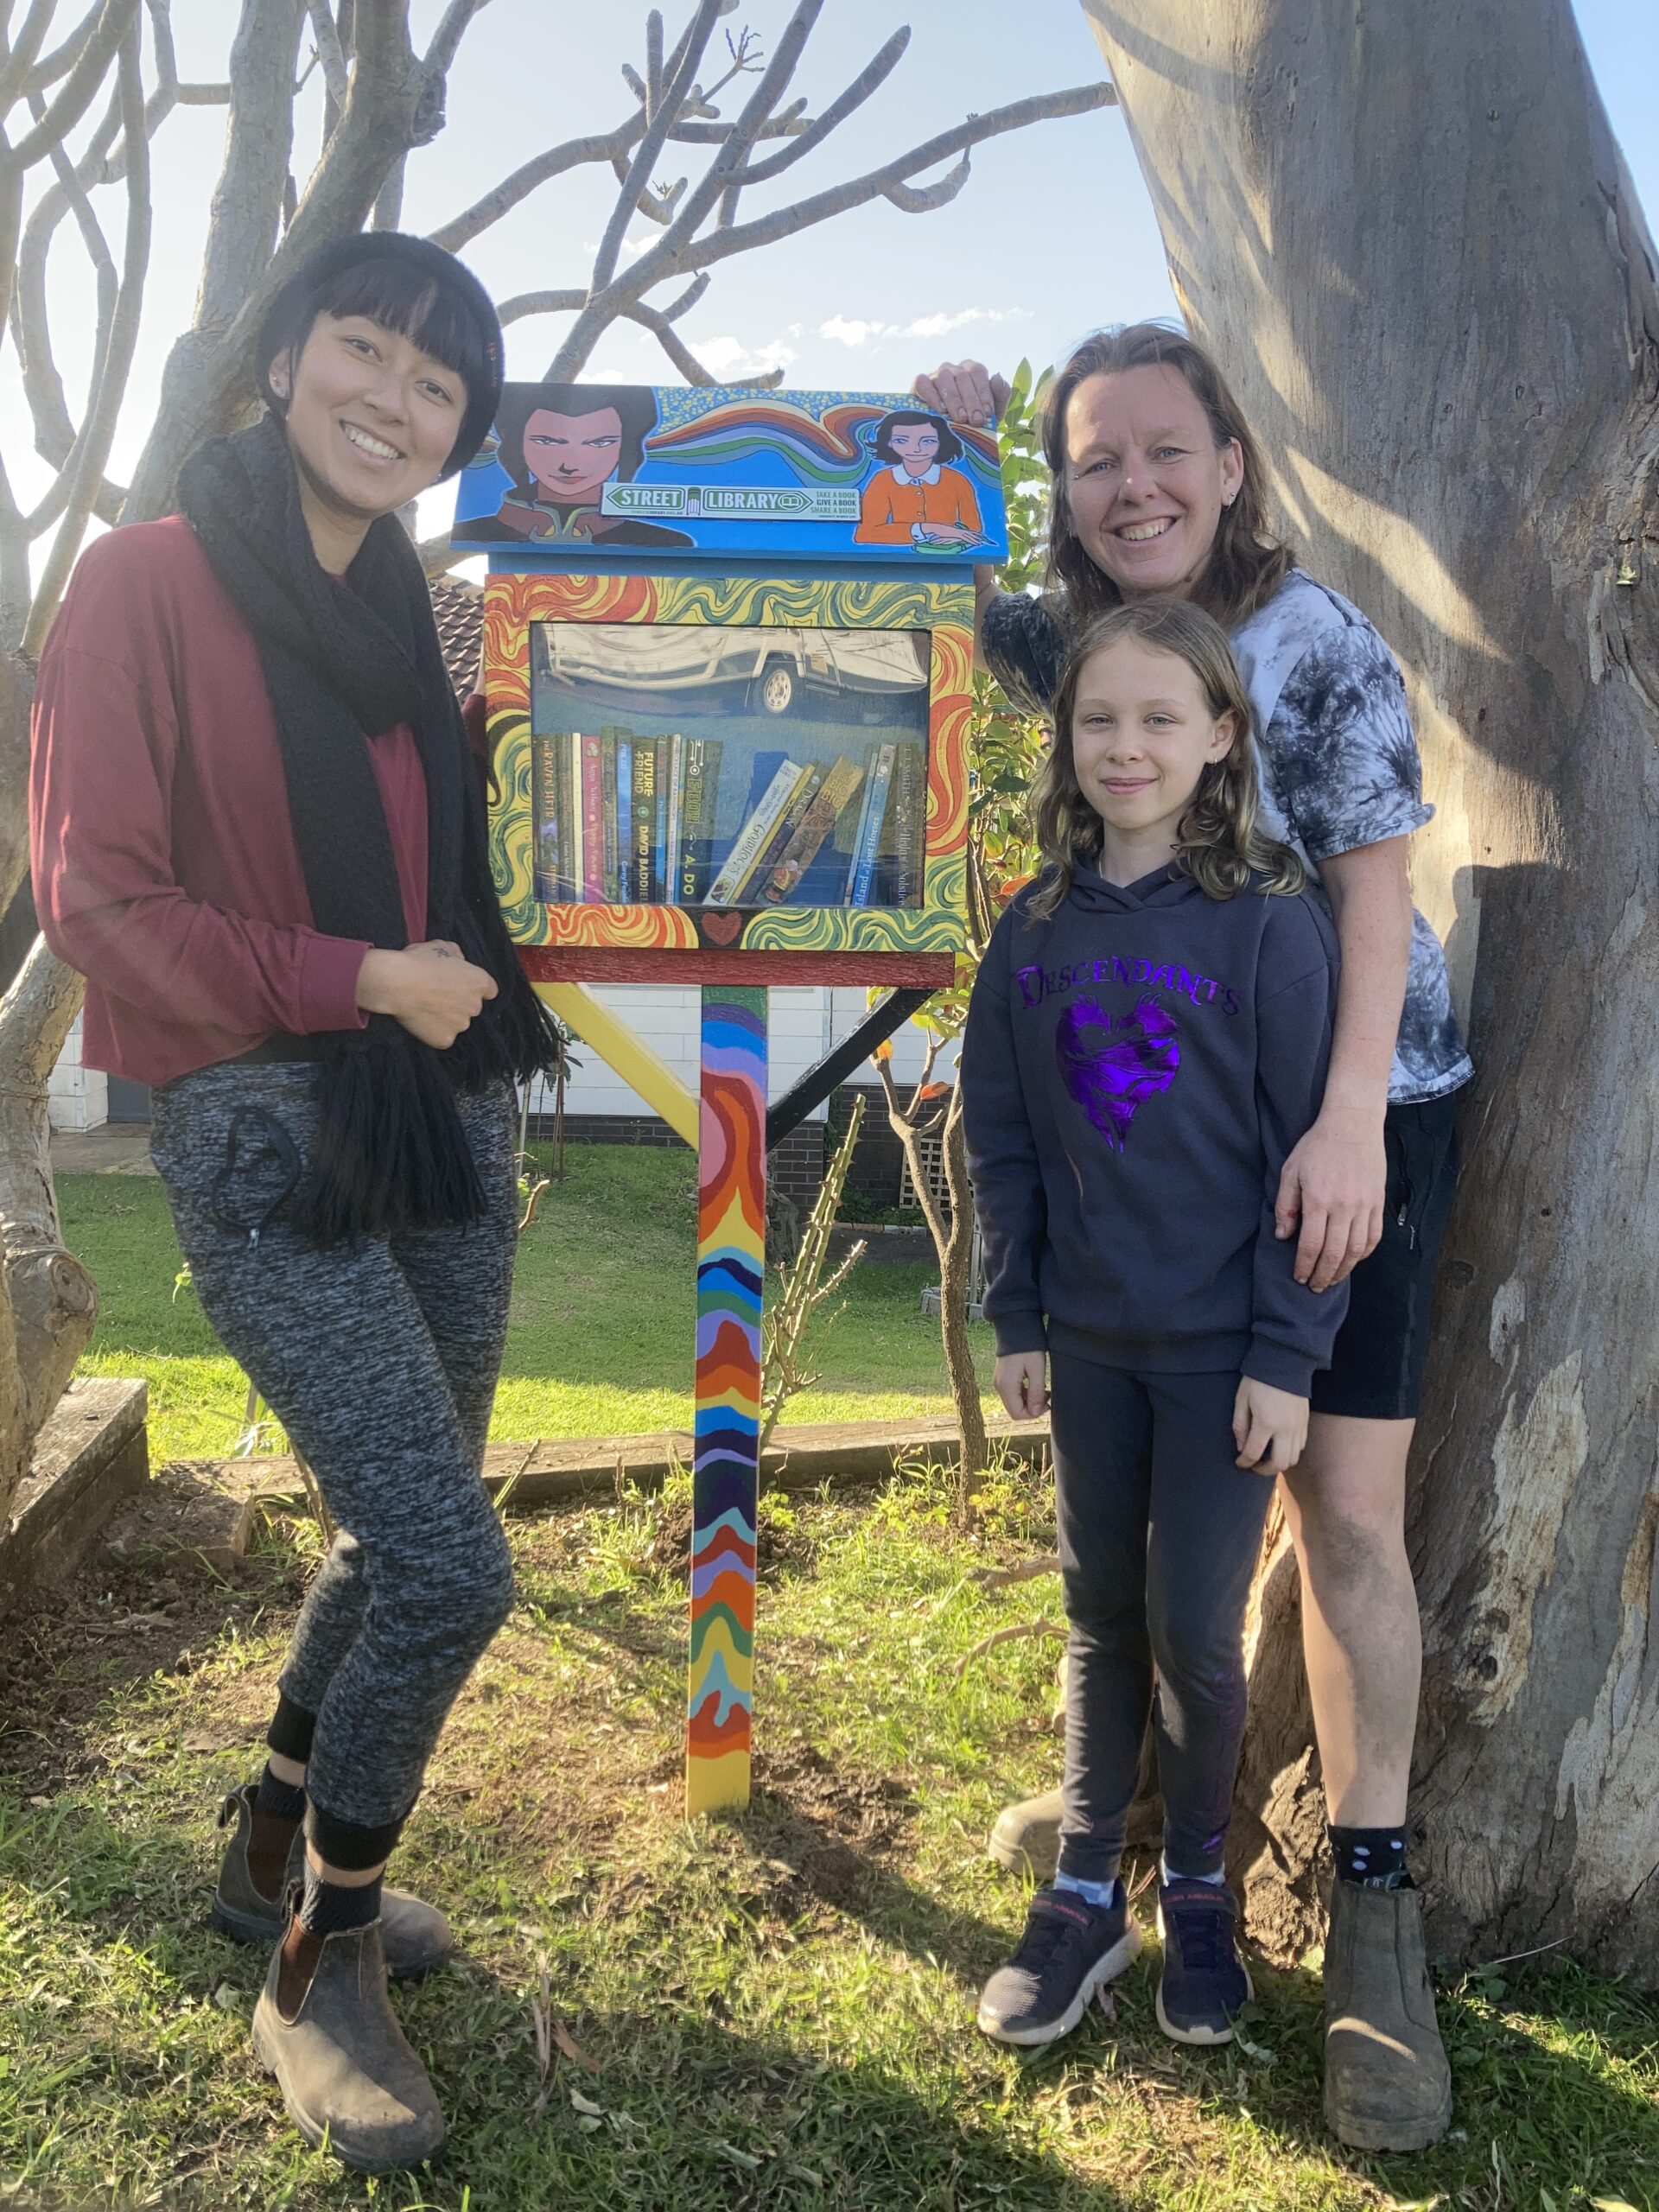 2 women and their daughter with a Street Library